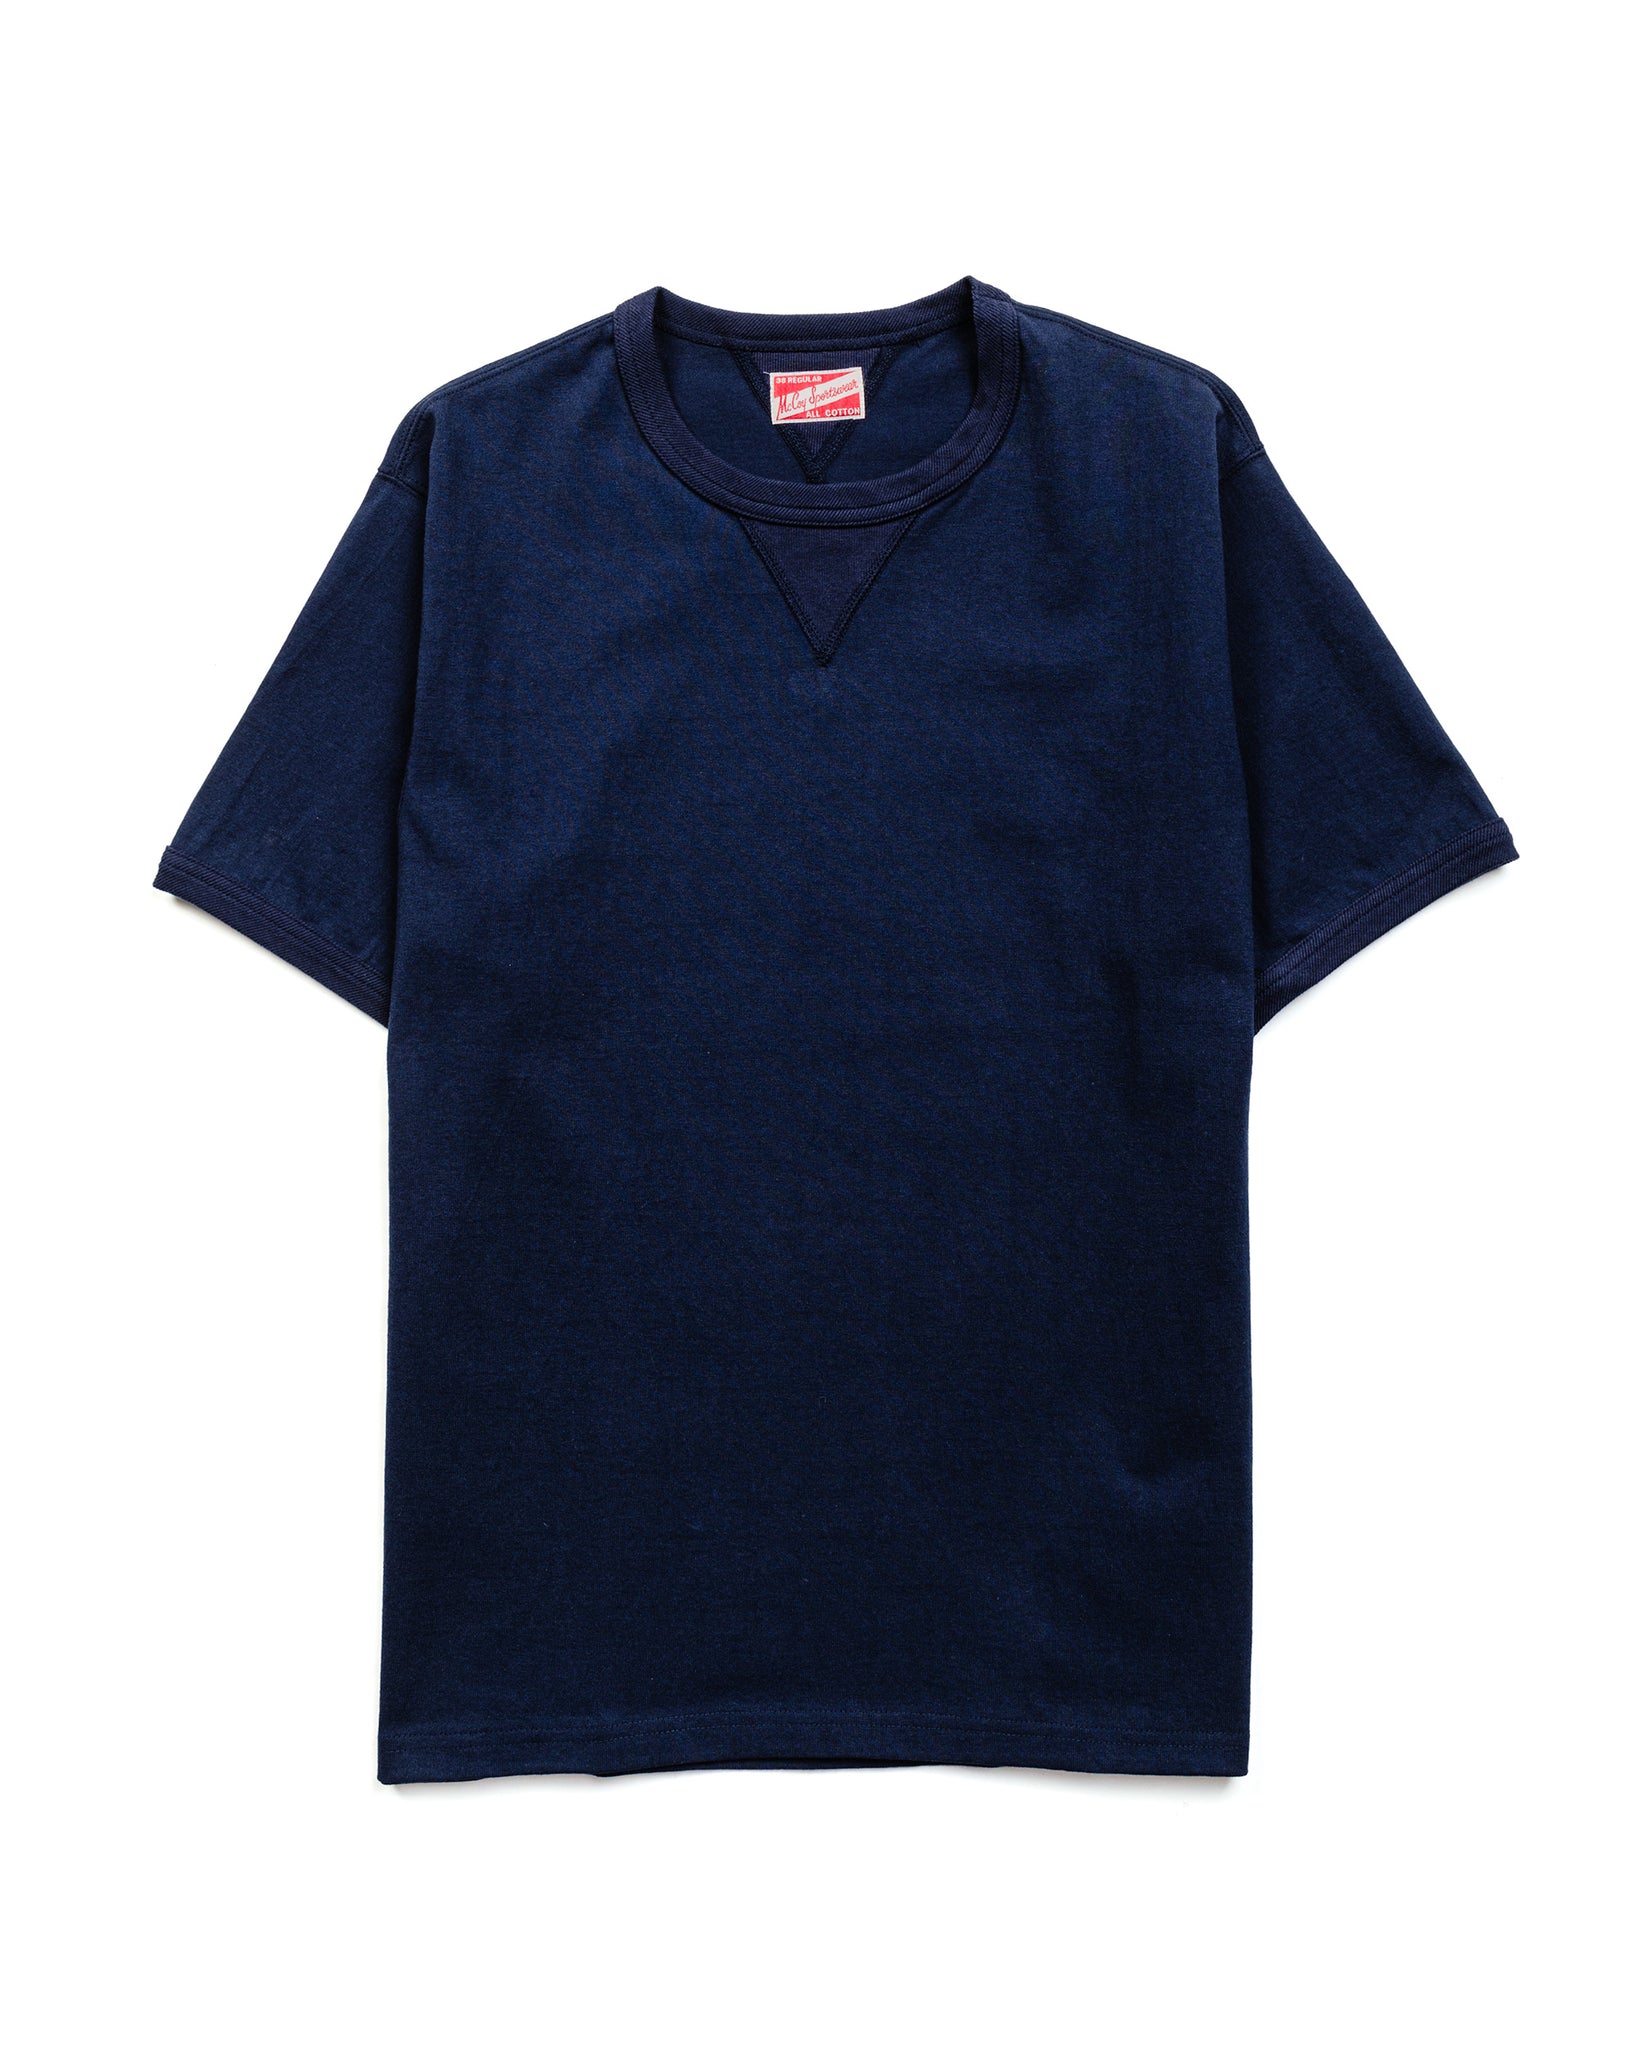 The Real McCoy's MC23020 Gusset Tee Navy